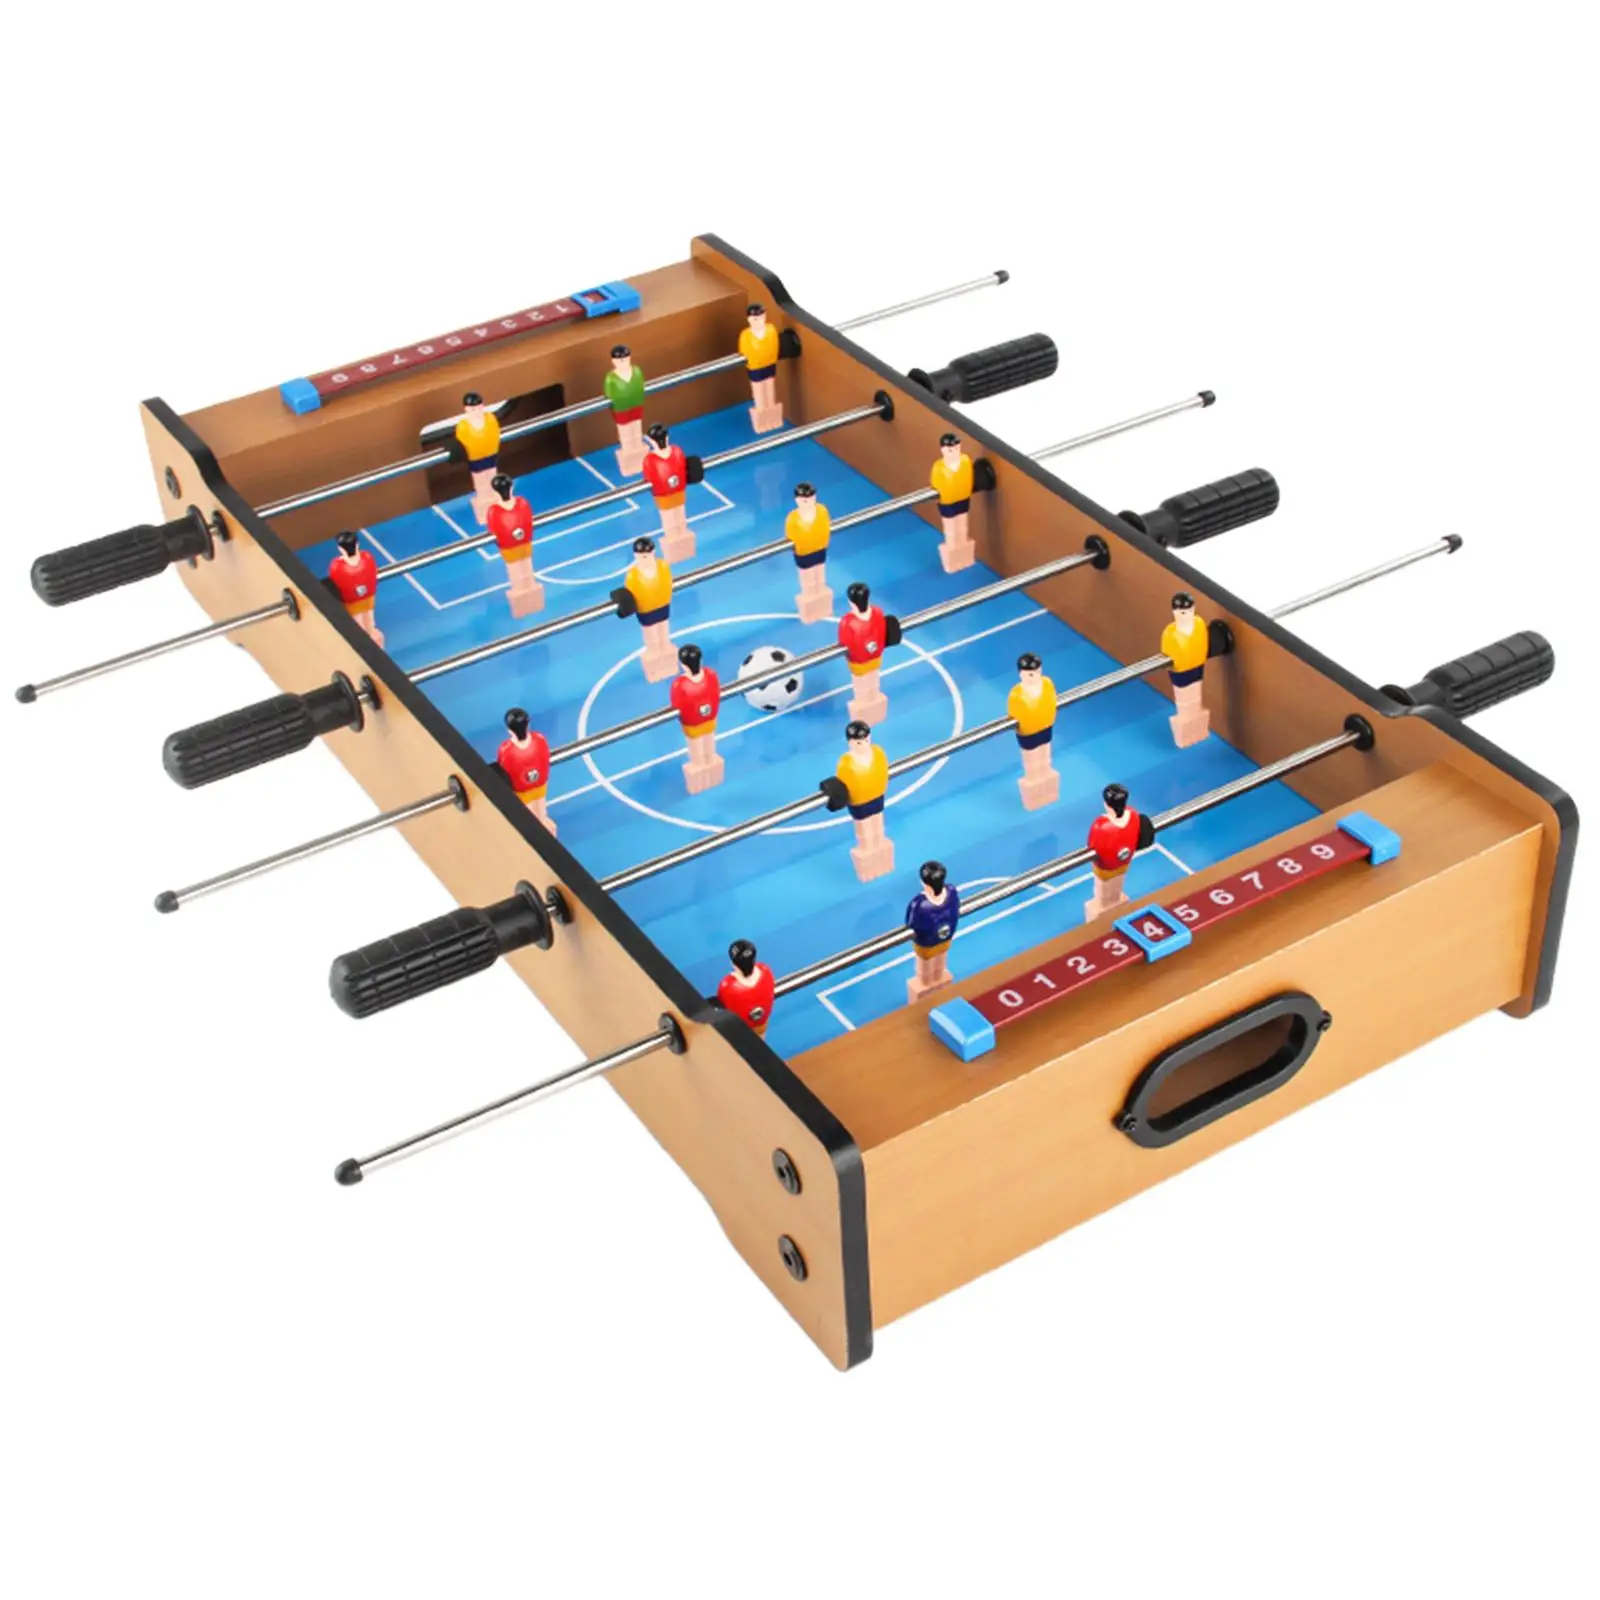 Cute Soccer Hockey Game Set Family Game Football Board Toy Sport Game Tabletop Play for Entertainment Two Sports